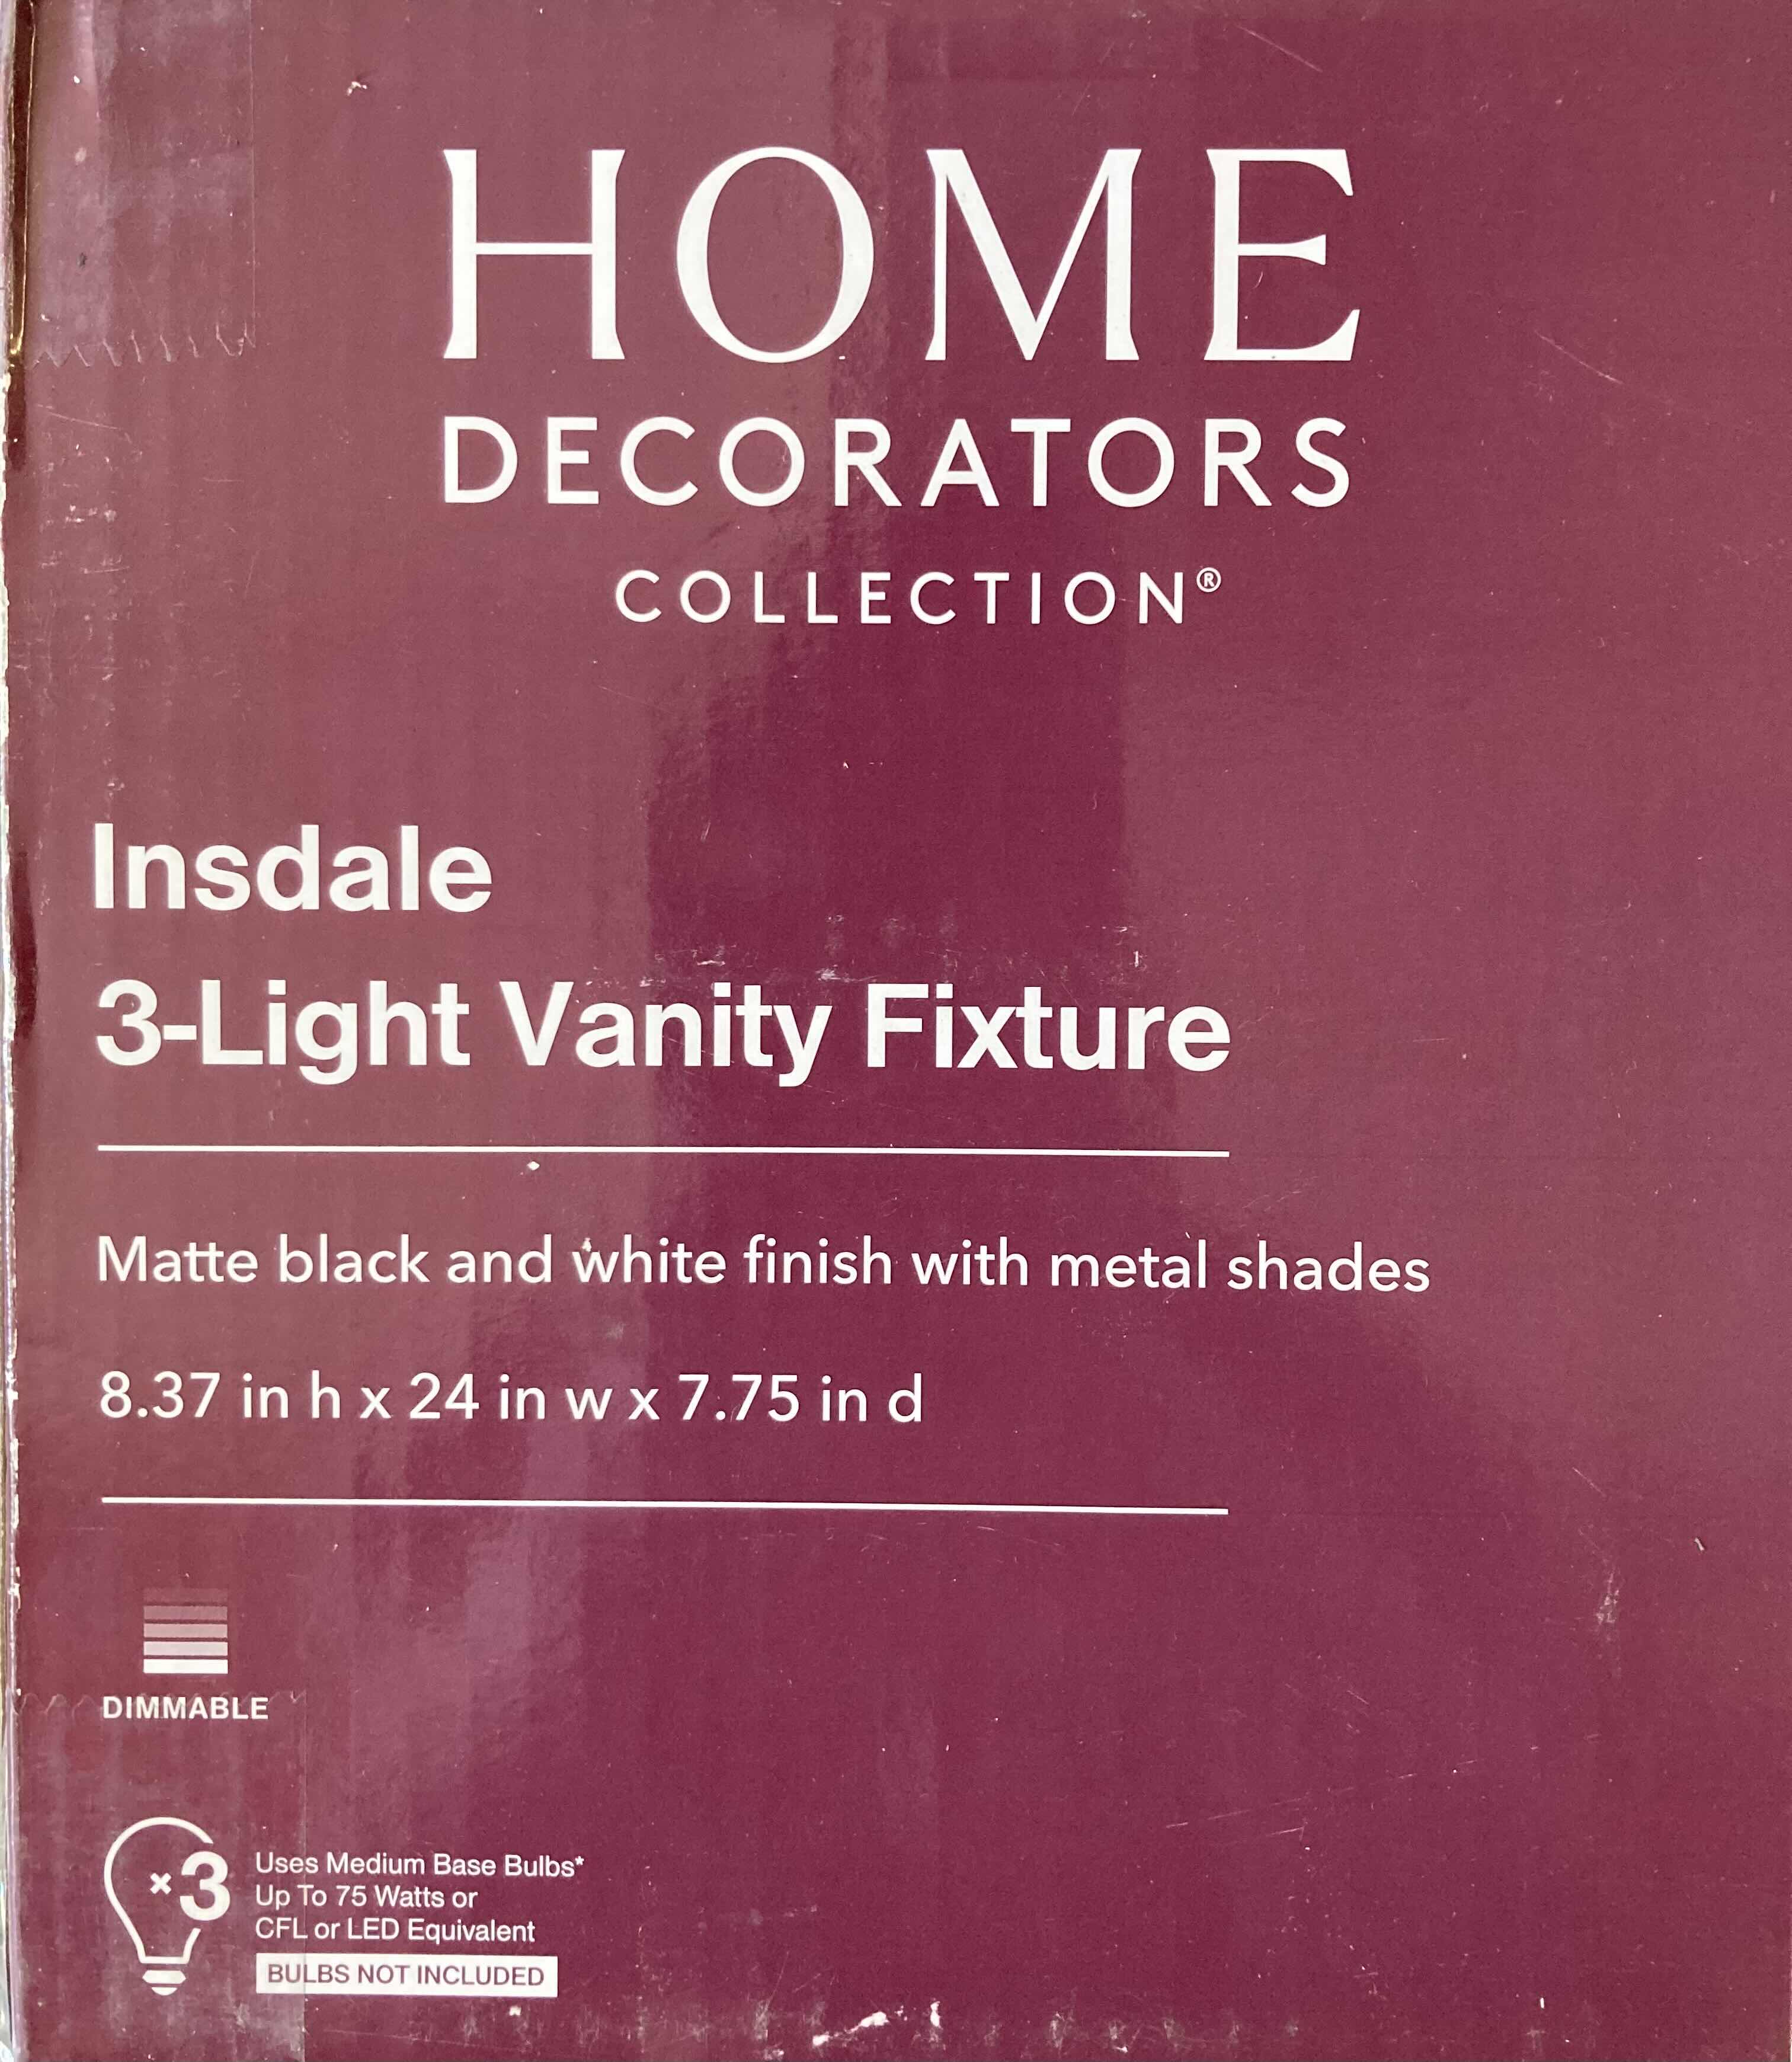 Photo 6 of HOME DECORATORS COLLECTION MATTE BLACK FINISH INSDALE 3 LIGHT METAL SHADE VANITY FIXTURE LIGHT 1006317716  24” X 7.75” H8.38”